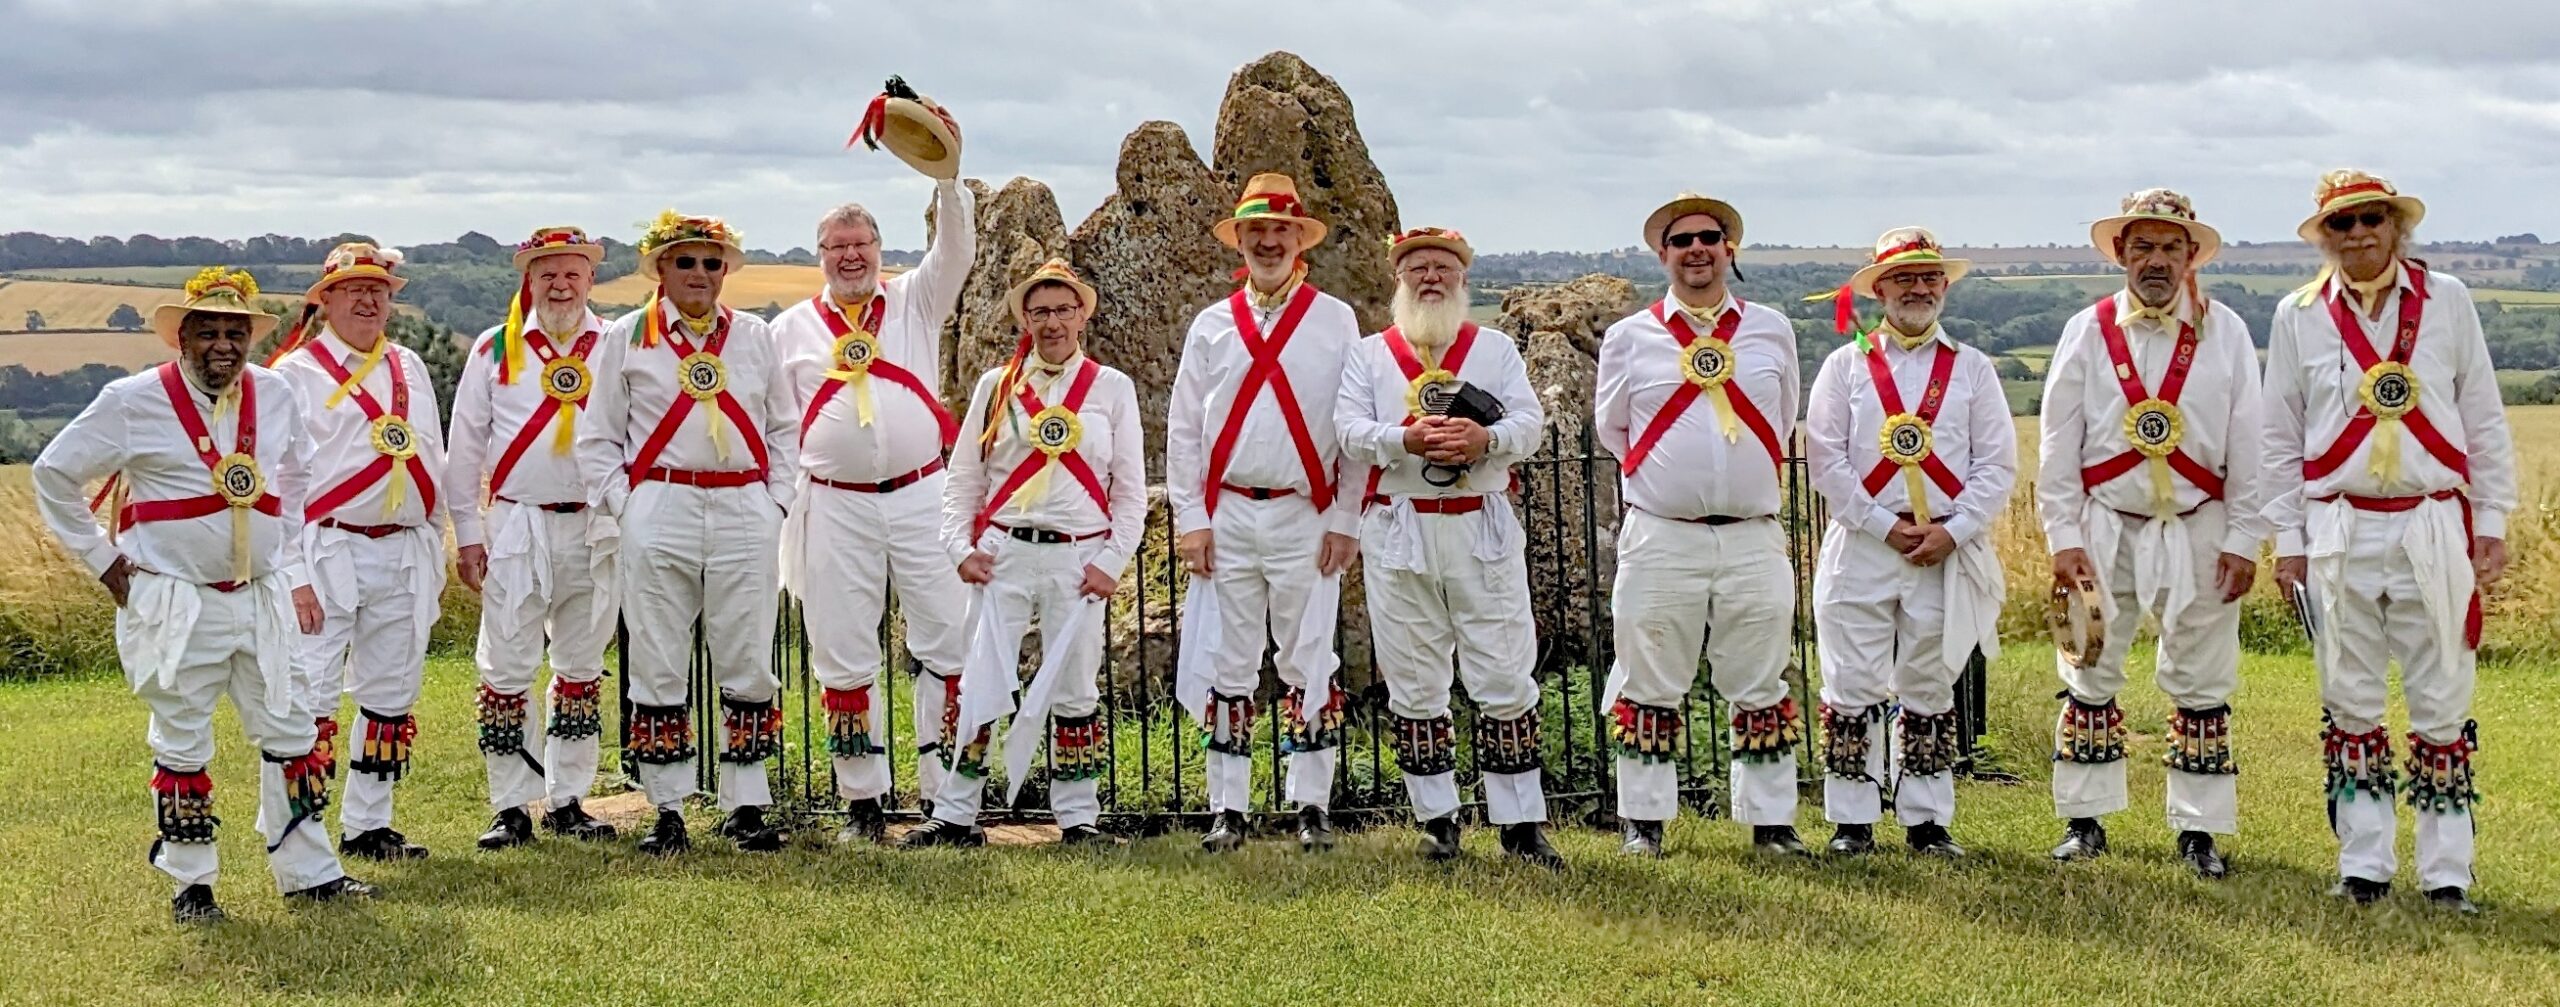 Group of Morris dancers in kit in front of Rollright Stone.